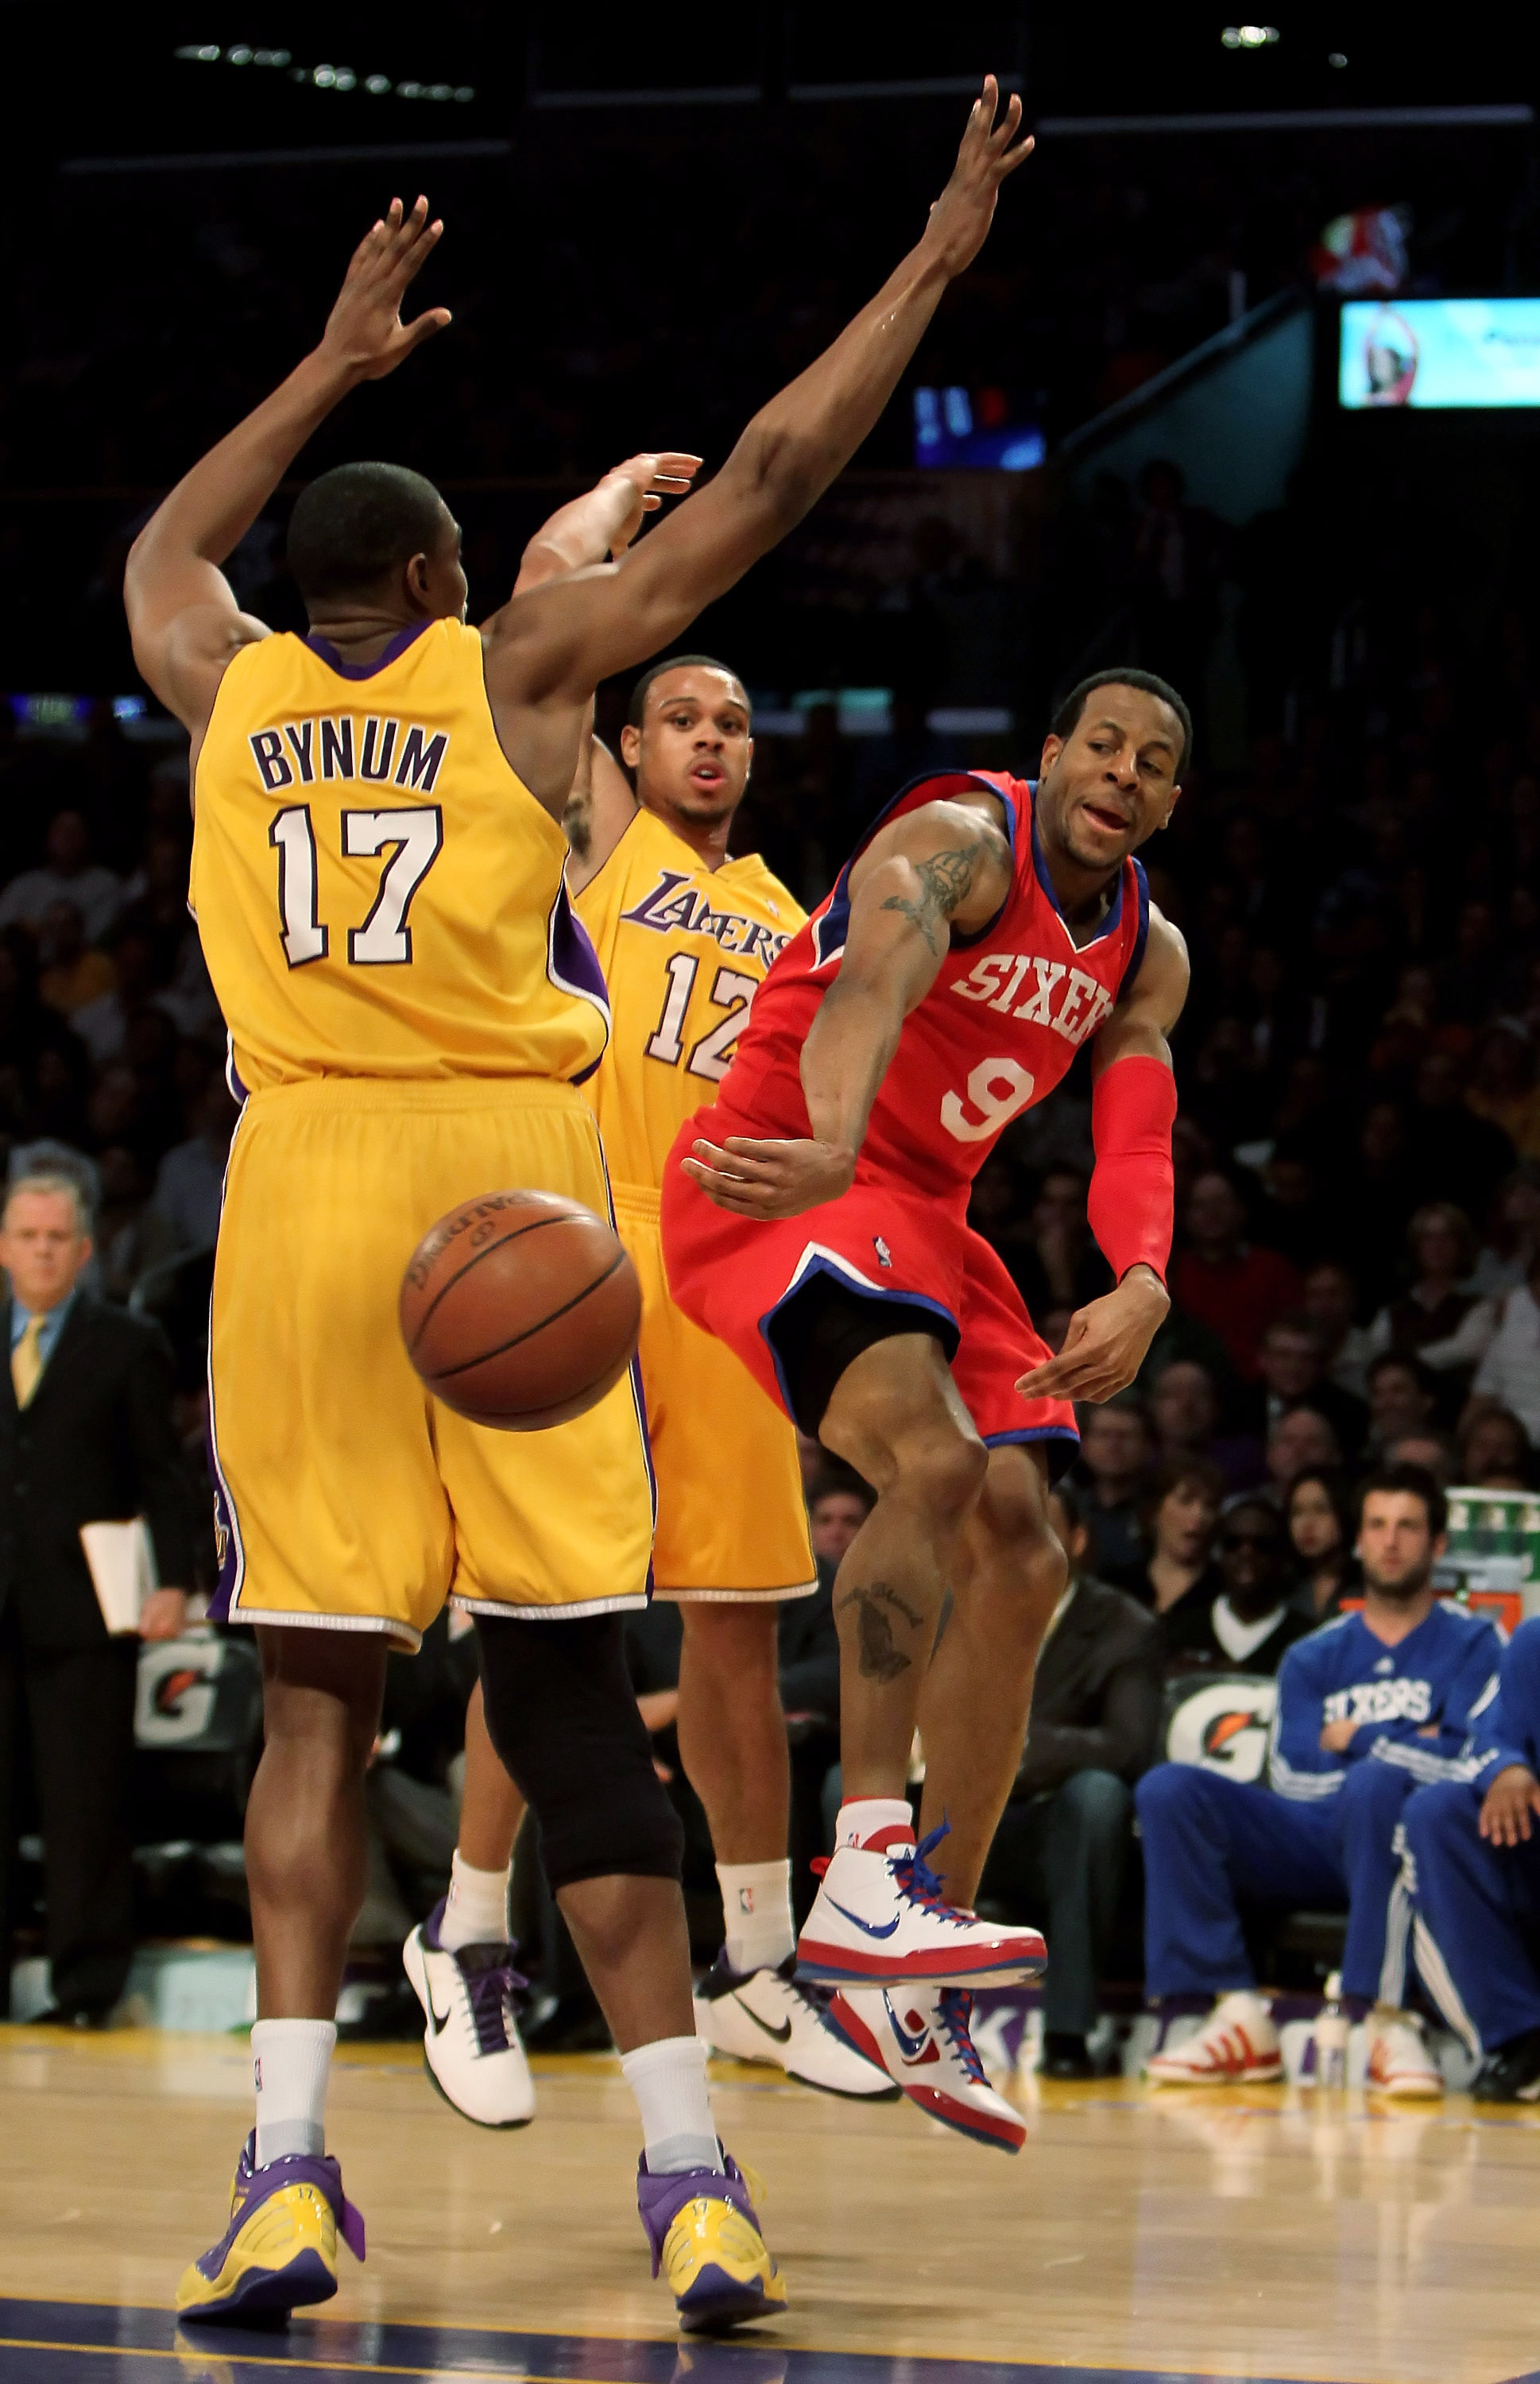 LOS ANGELES, CA - FEBRUARY 26:  Andre Iguodala #9 of the Philadelphia 76ers passes the ball around Andrew Bynum #17 of the Los Angeles Lakers in the first half at Staples Center on February 26, 2010 in Los Angeles, California. NOTE TO USER: User expressly